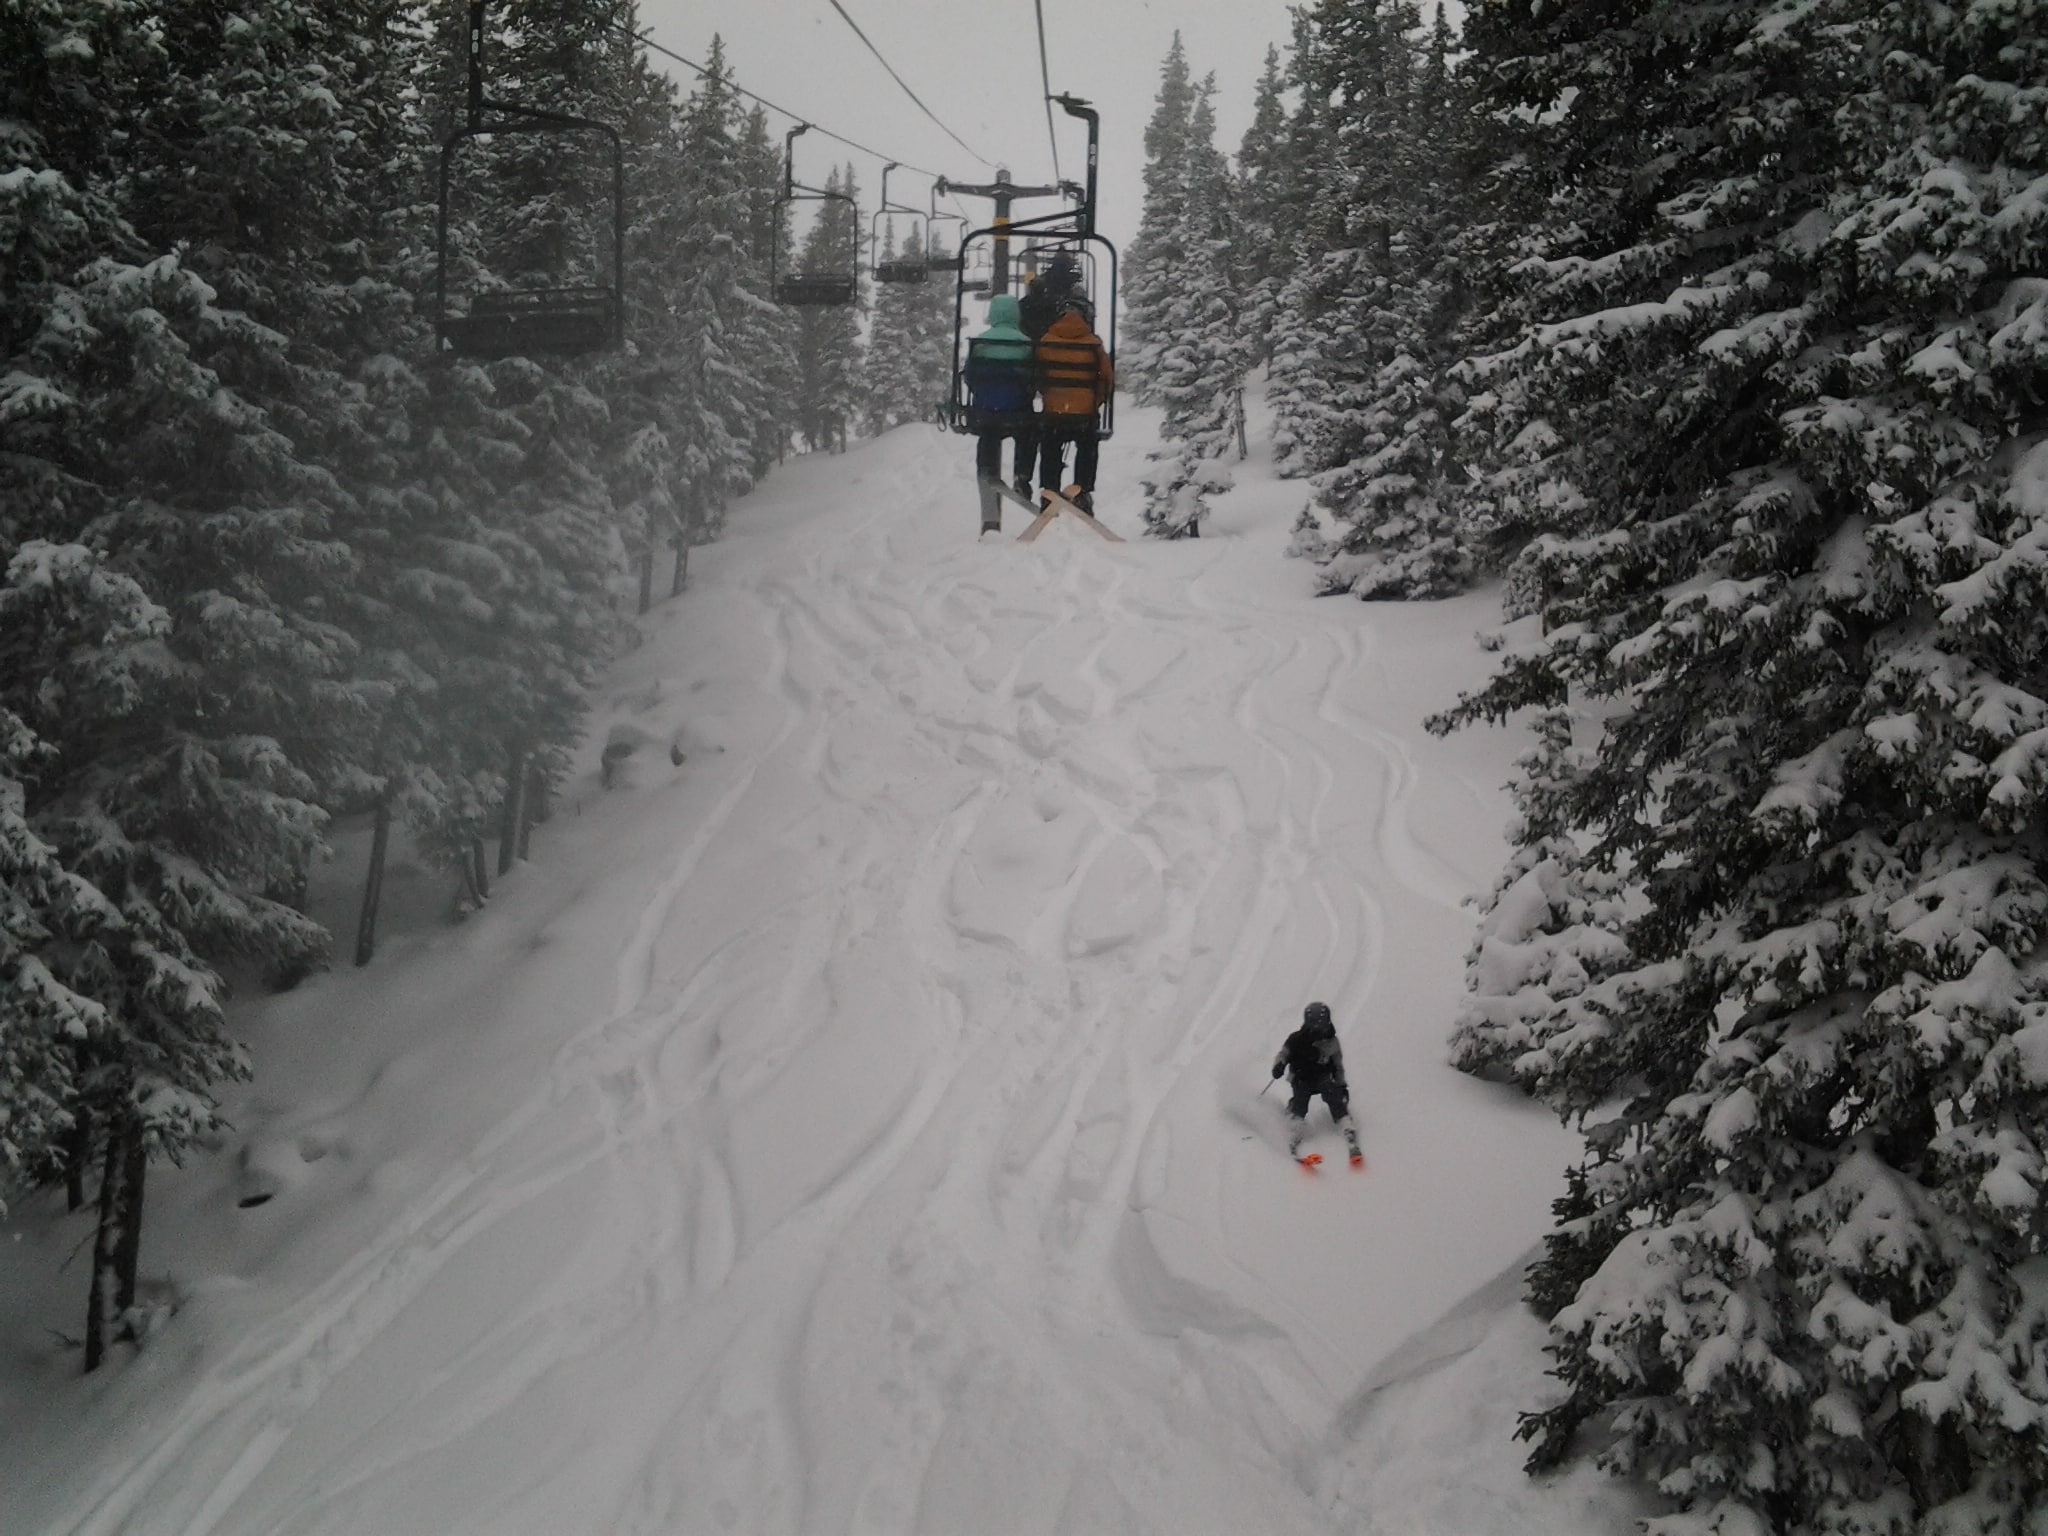 Winter snowy day with a skier skiing in powder on a steep hill below the chair lift.